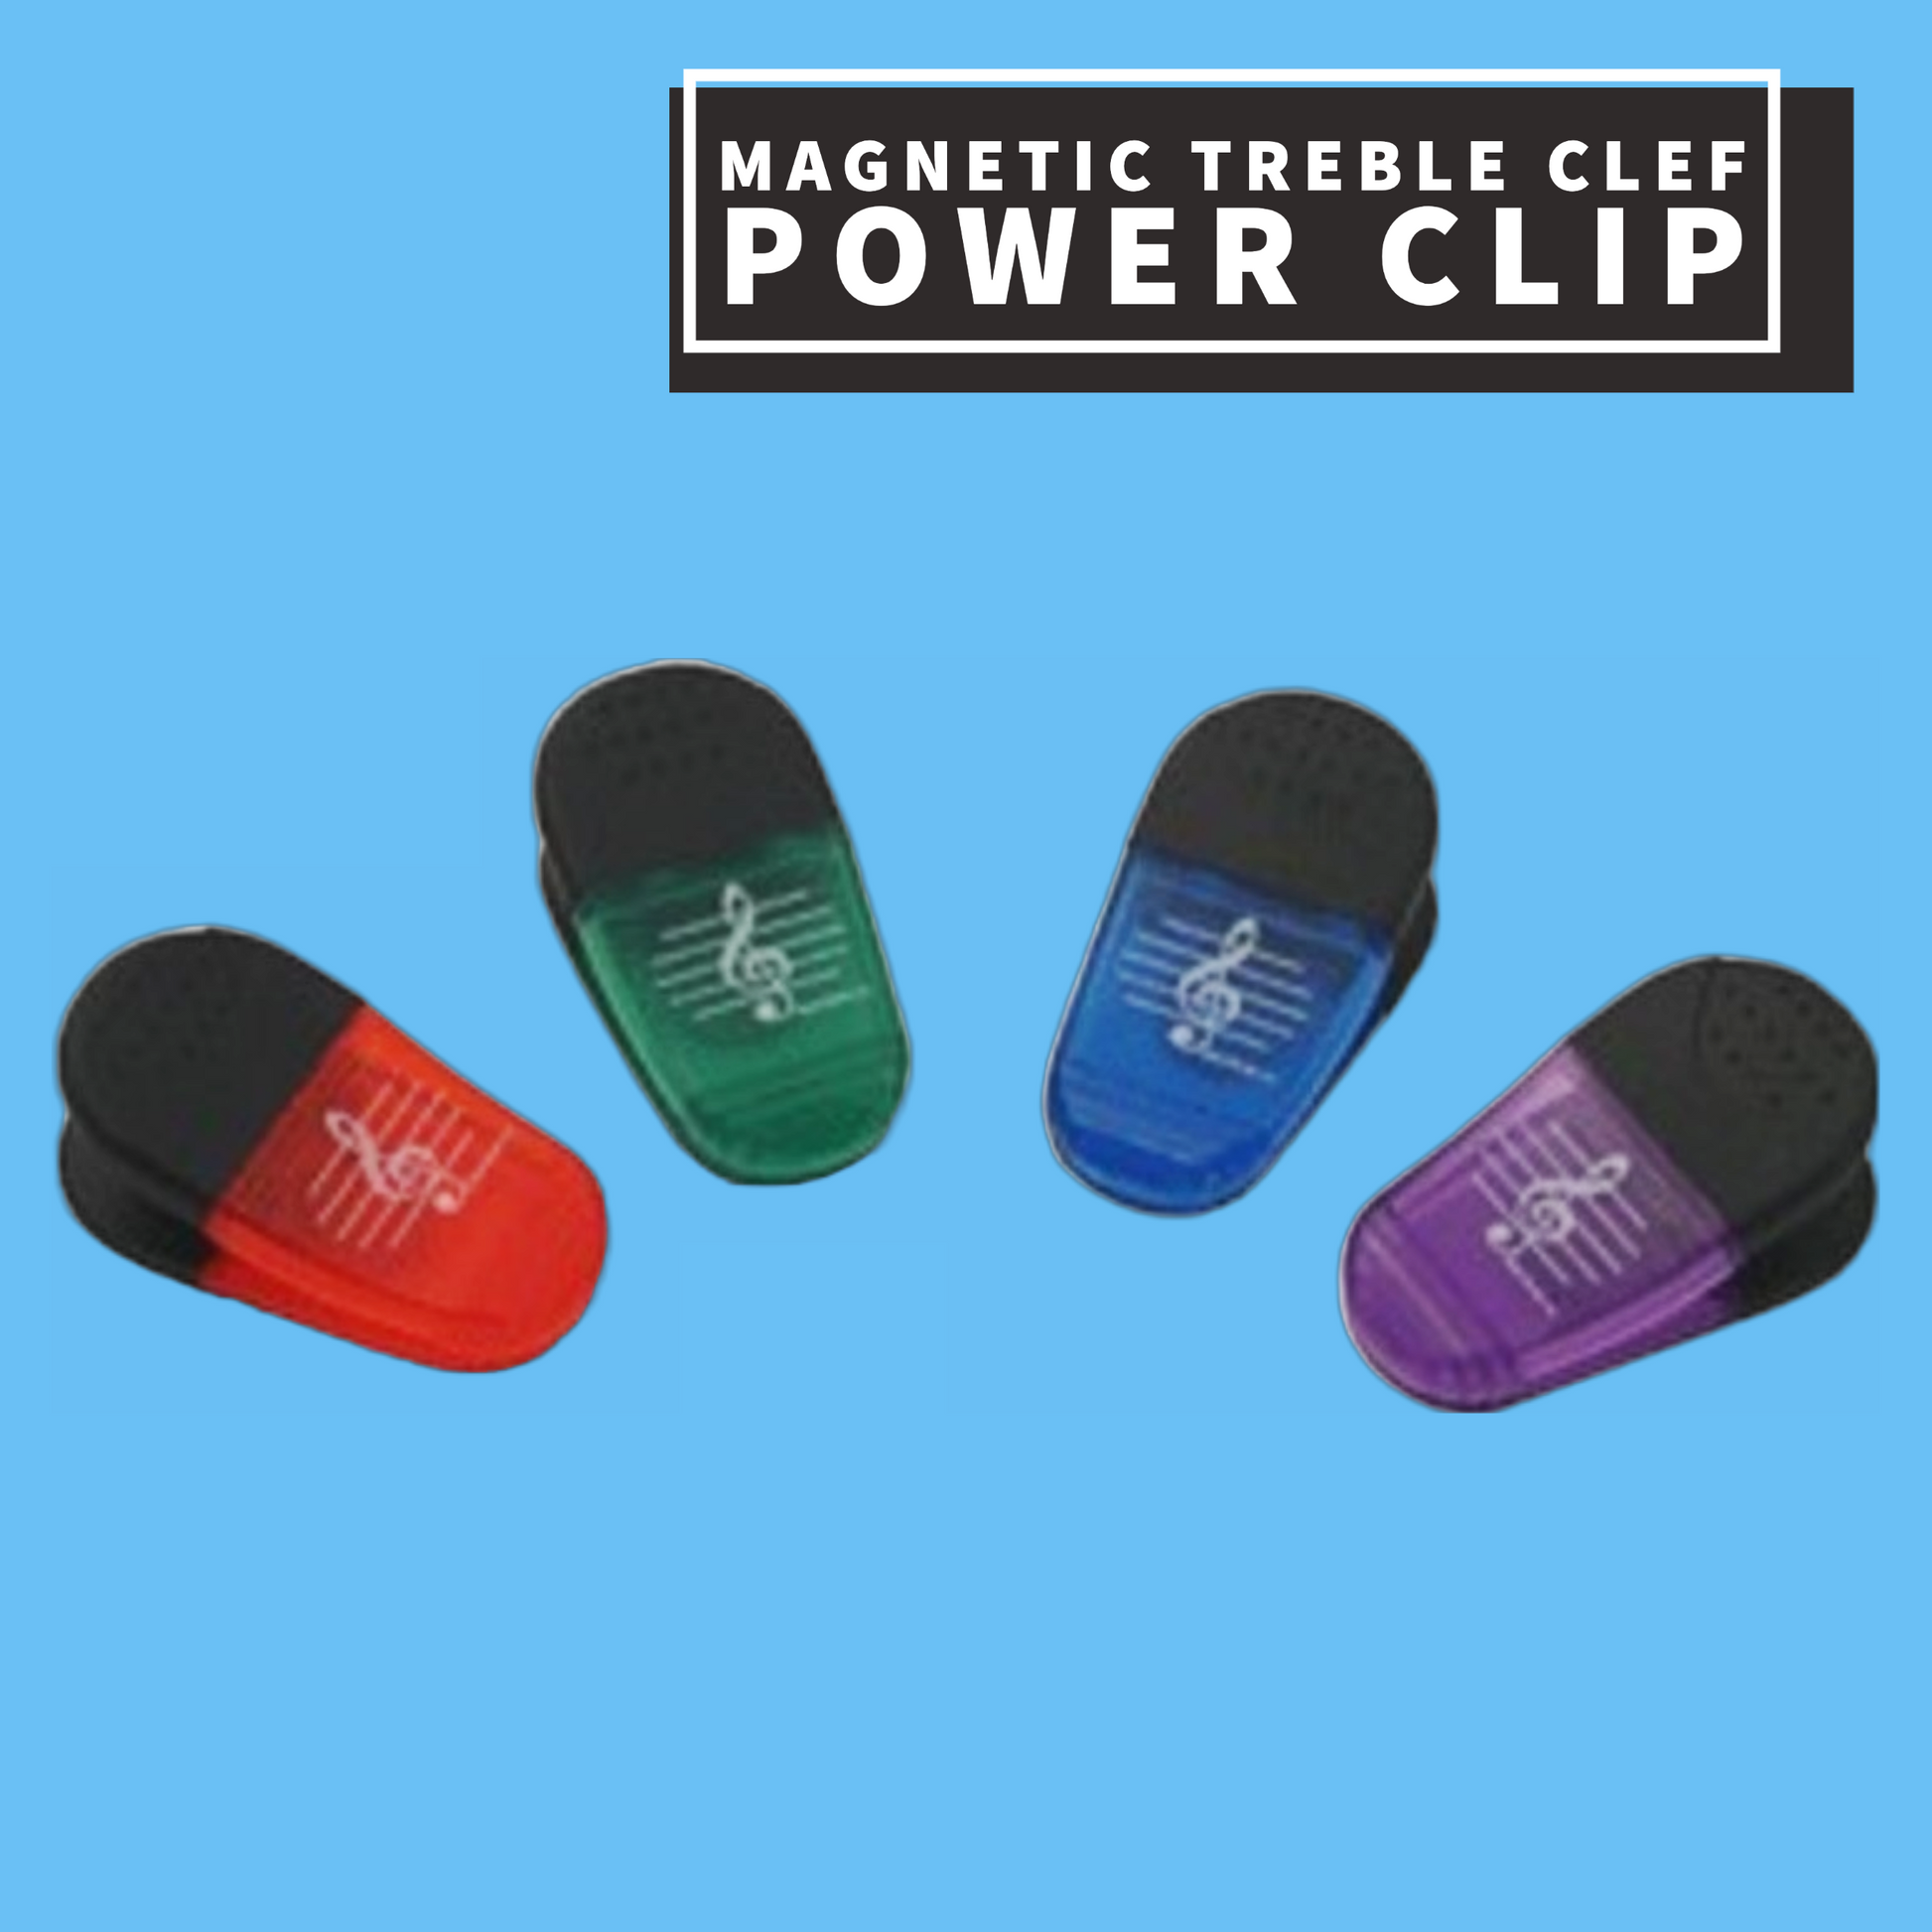 Magnetic Treble Clef Power Clip (Assorted Colours) Giftware